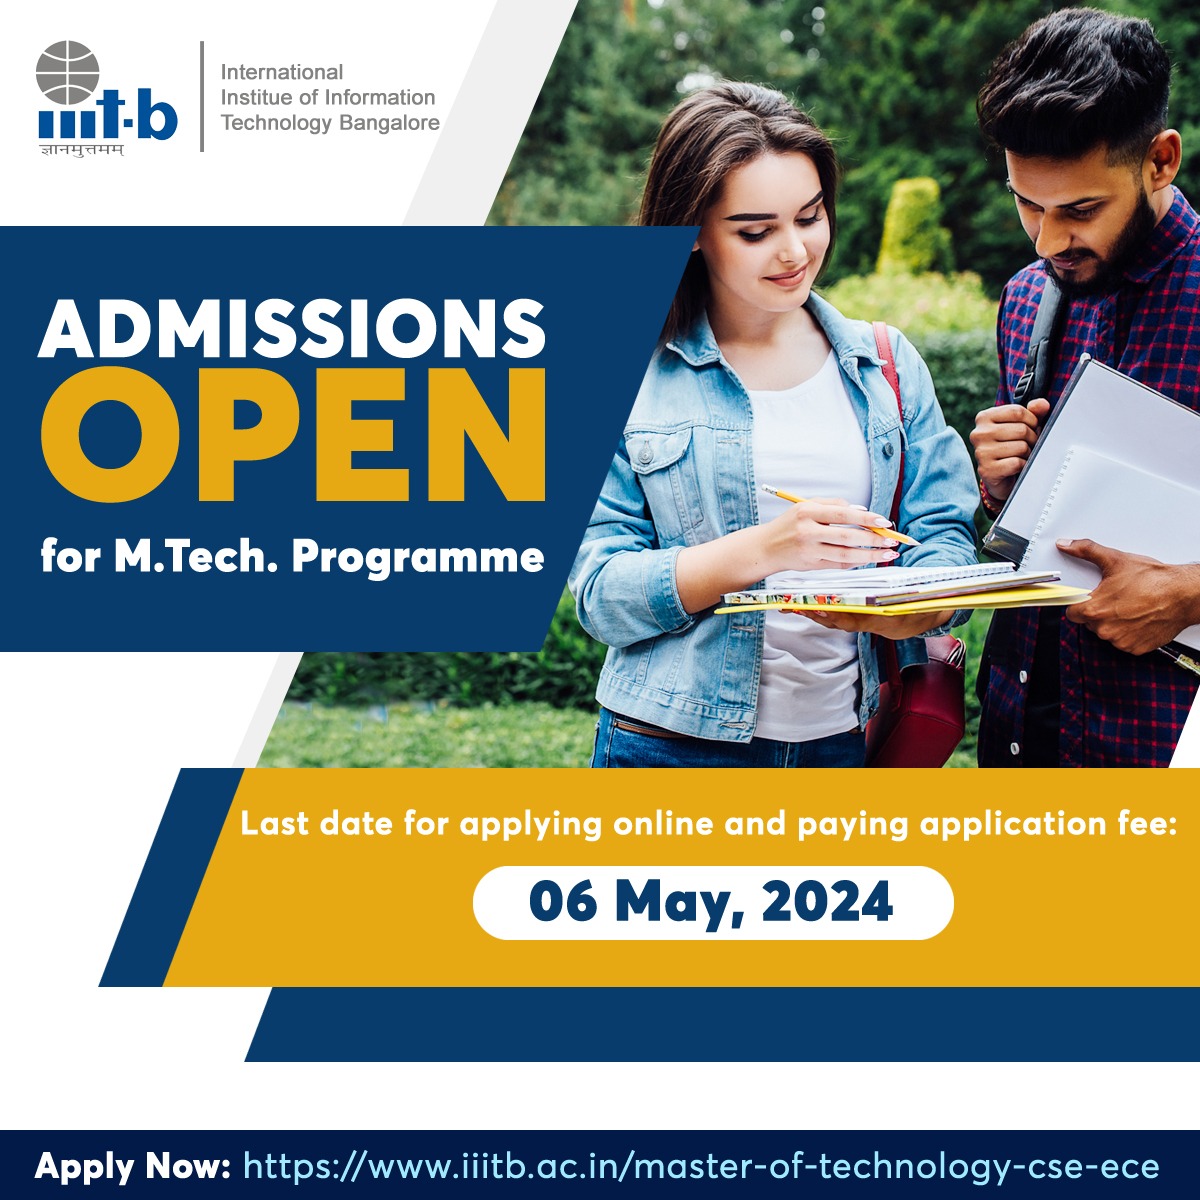 #AdmissionsOpen for M.Tech. Programme Computer Science & Engineering (CSE) Electronics & Communication Engineering (ECE) Last date for applying online and paying application fee: May 6, 2024 Apply Now: iiitb.ac.in/master-of-tech… #IIITB #IIITBangalore